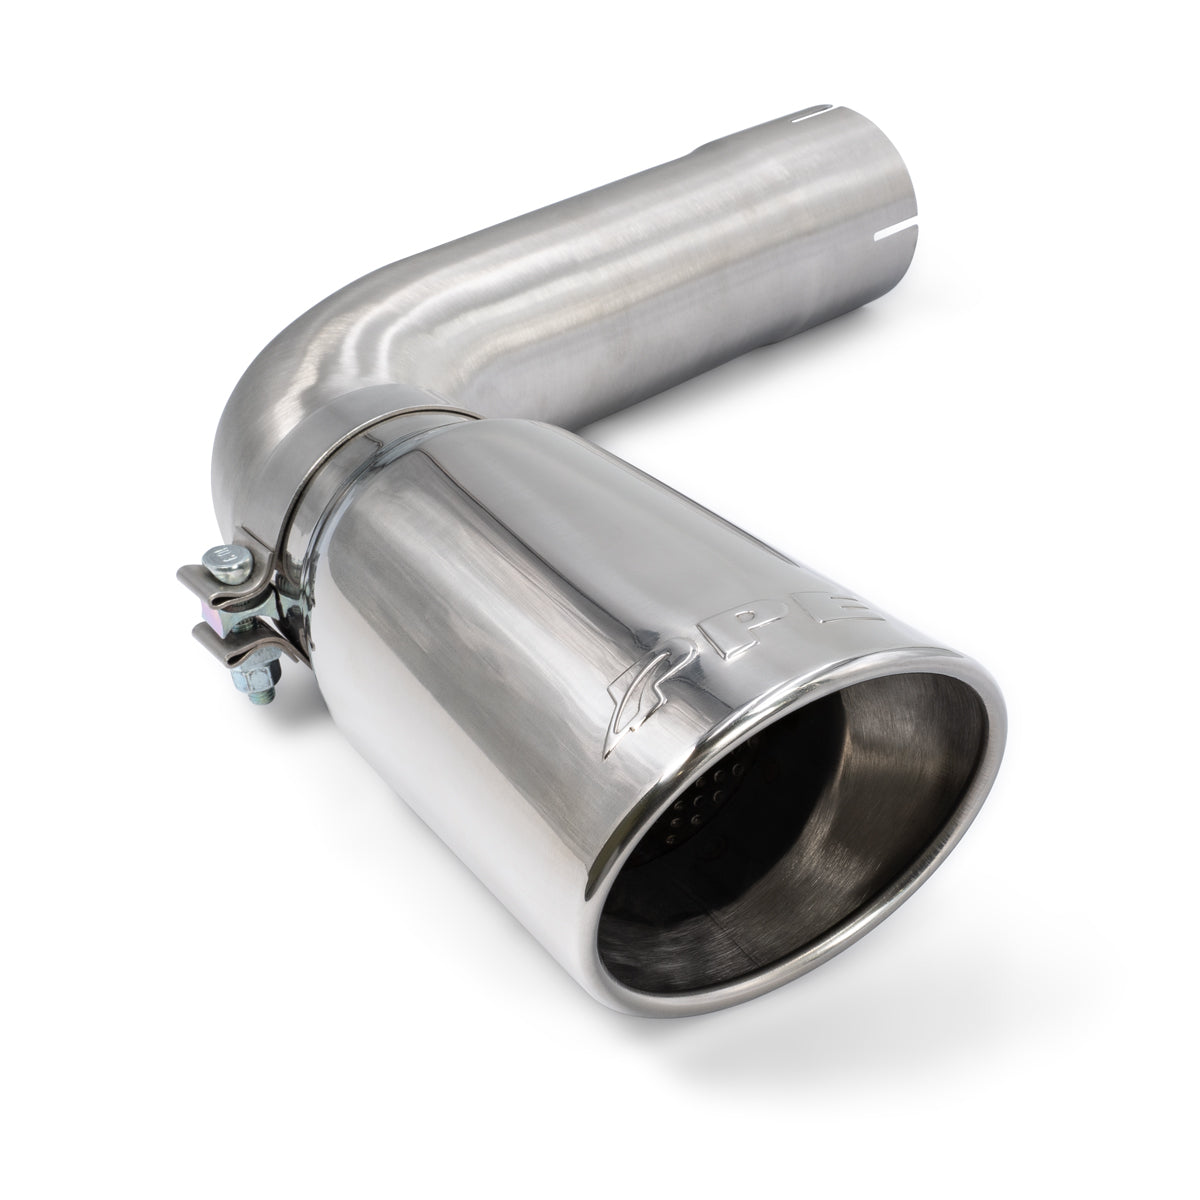 2020+ GM 6.6L Duramax 304 Stainless Steel Four Inch Performance Exhaust Upgrade Polished